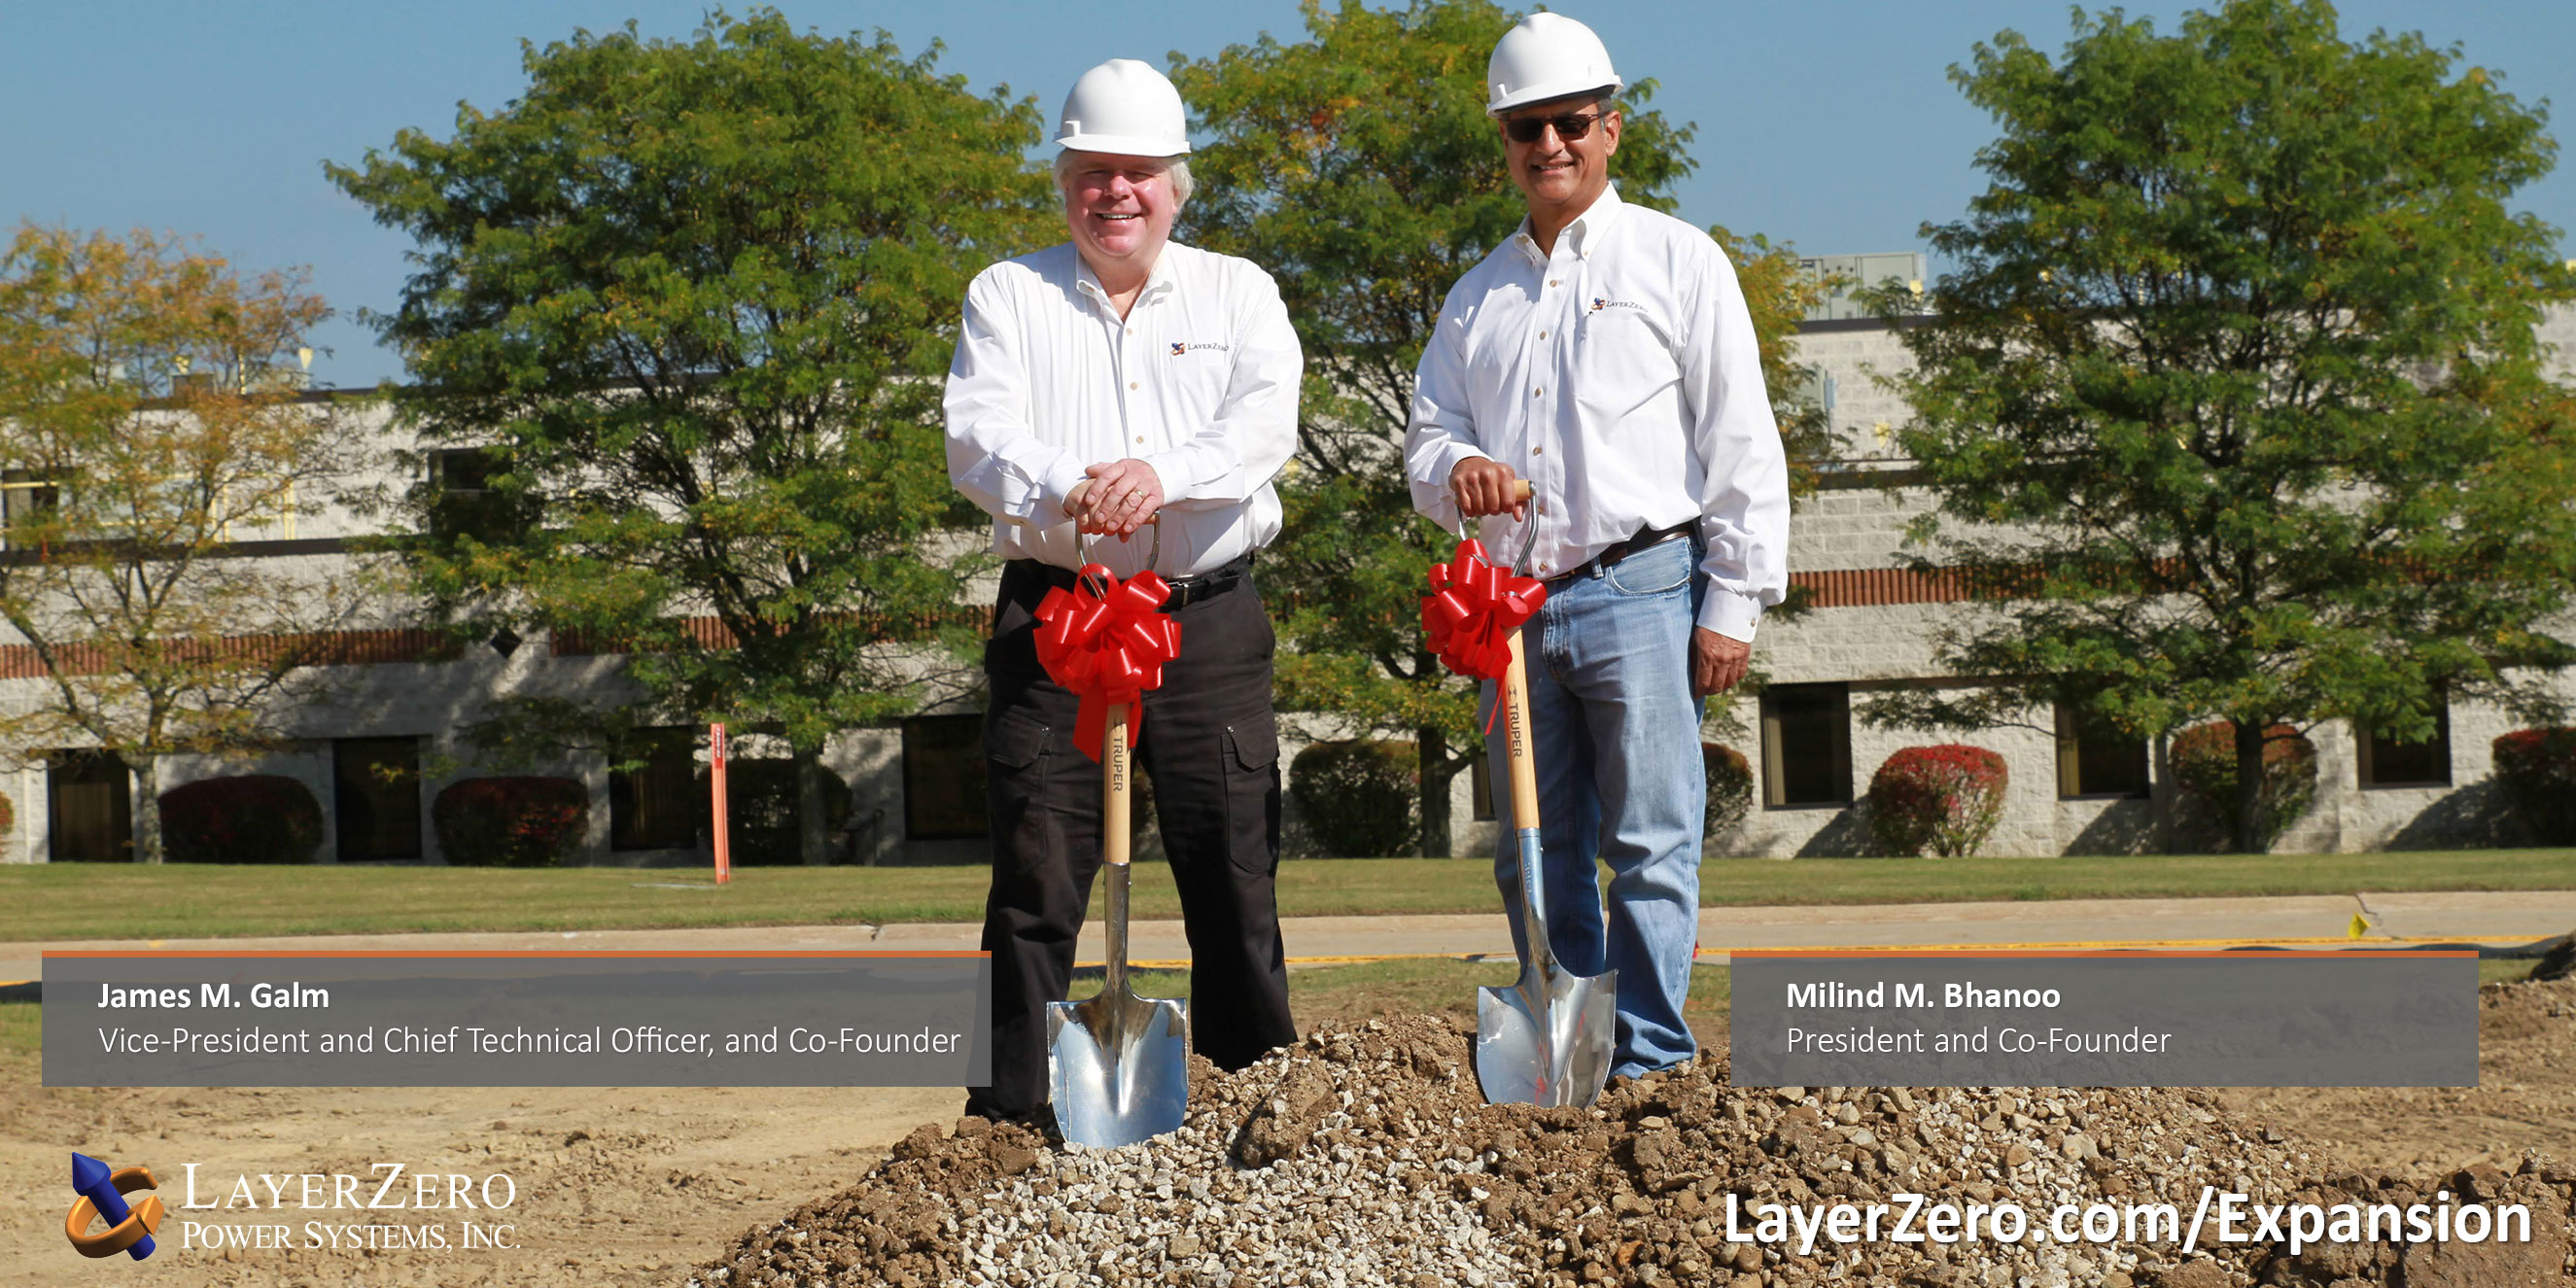 The Founders of LayerZero at the Groundbreaking Ceremony